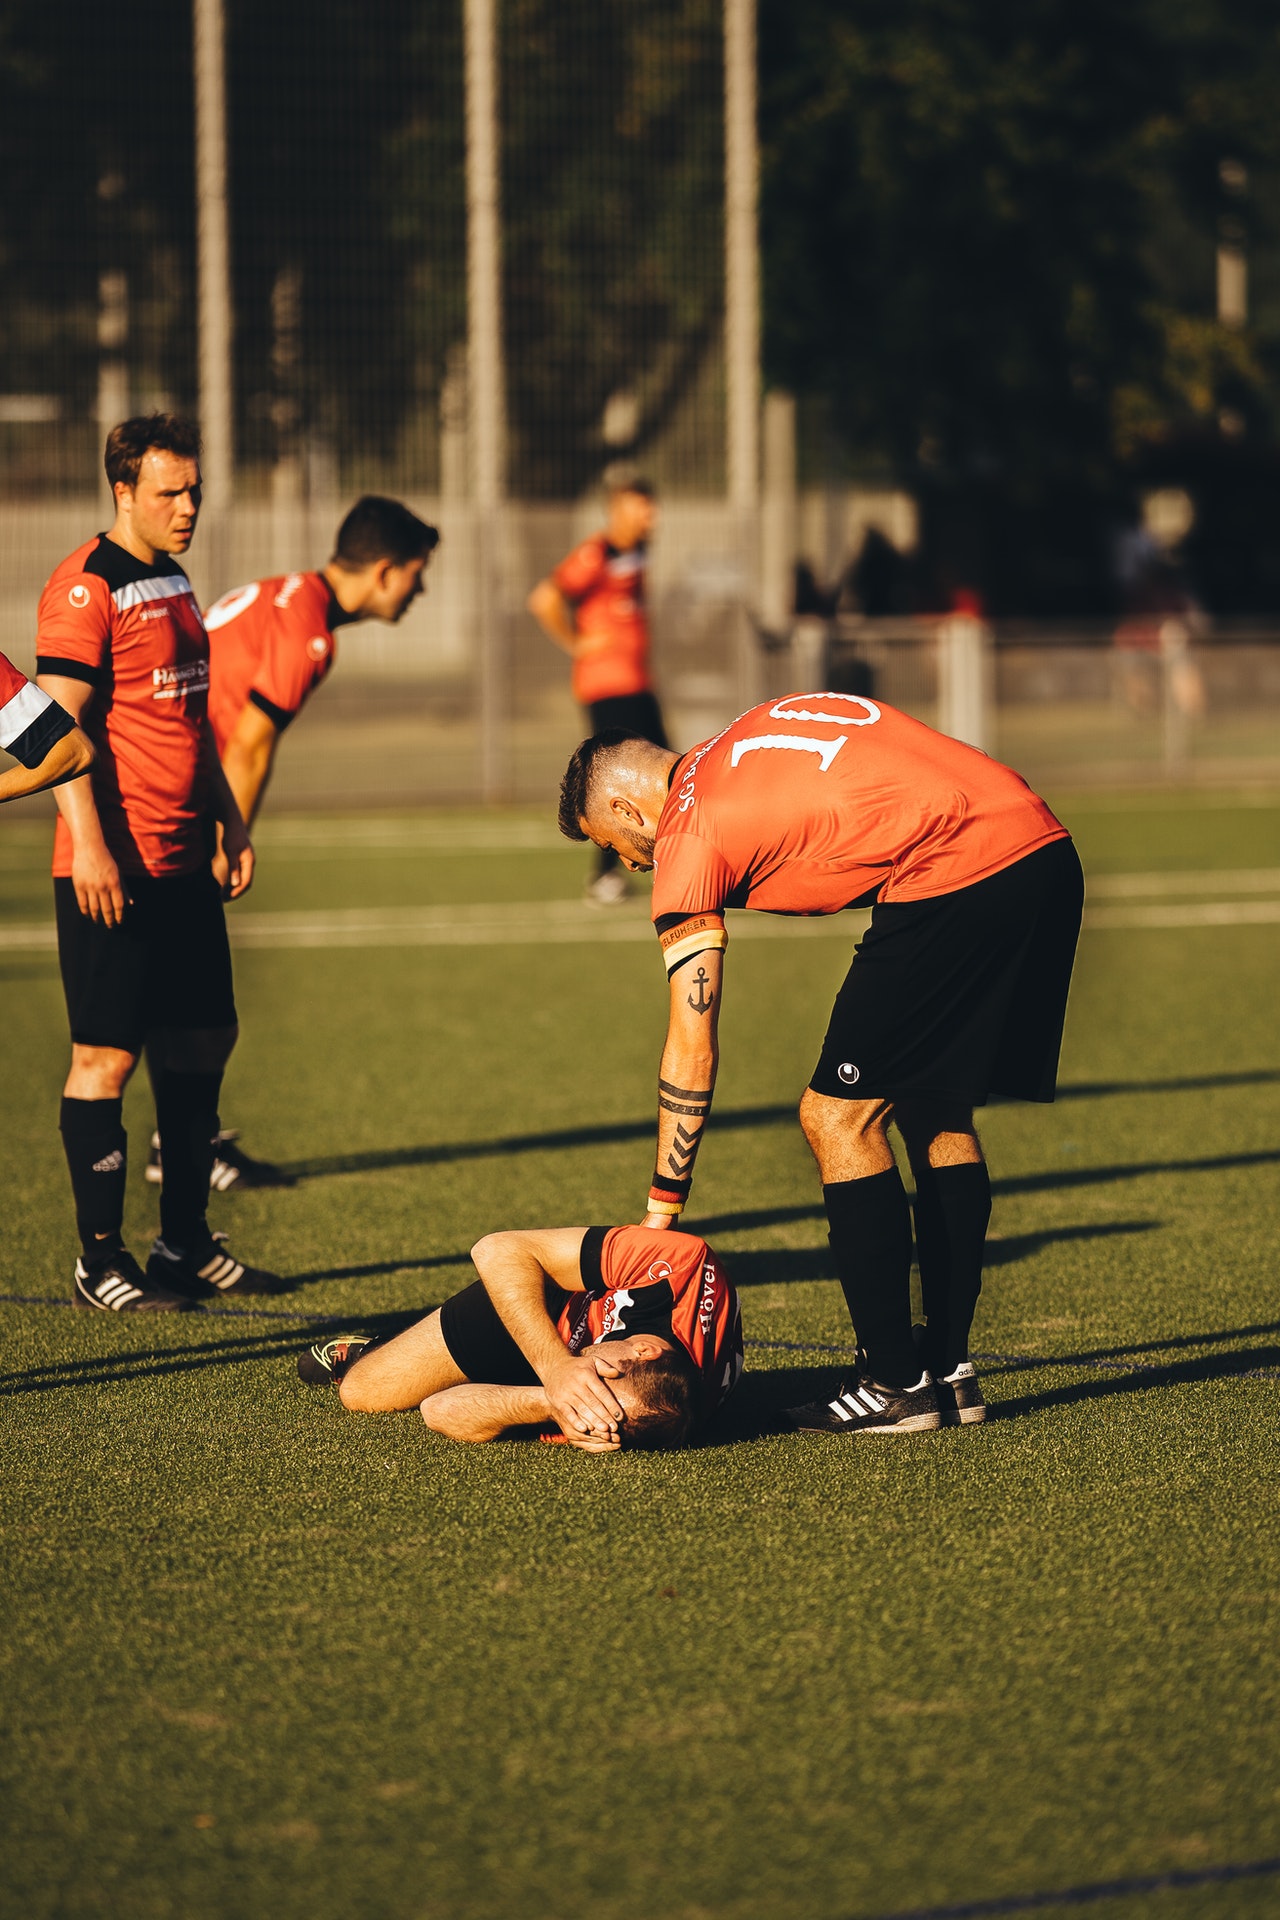 Injured soccer player lying on the ground